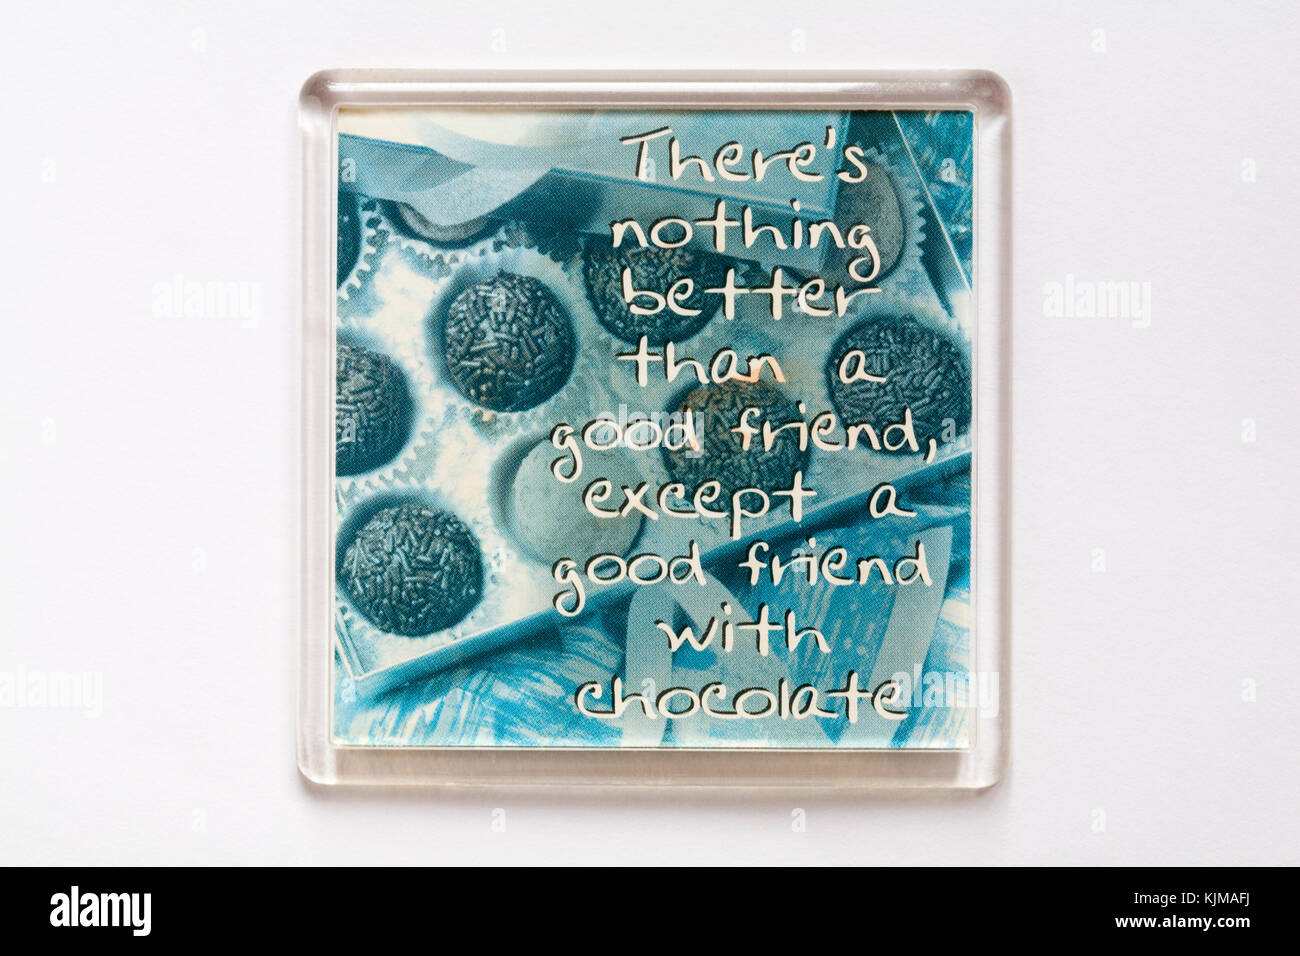 fridge magnet - there's nothing better than a good friend except a good friend with chocolate isolated on white background Stock Photo